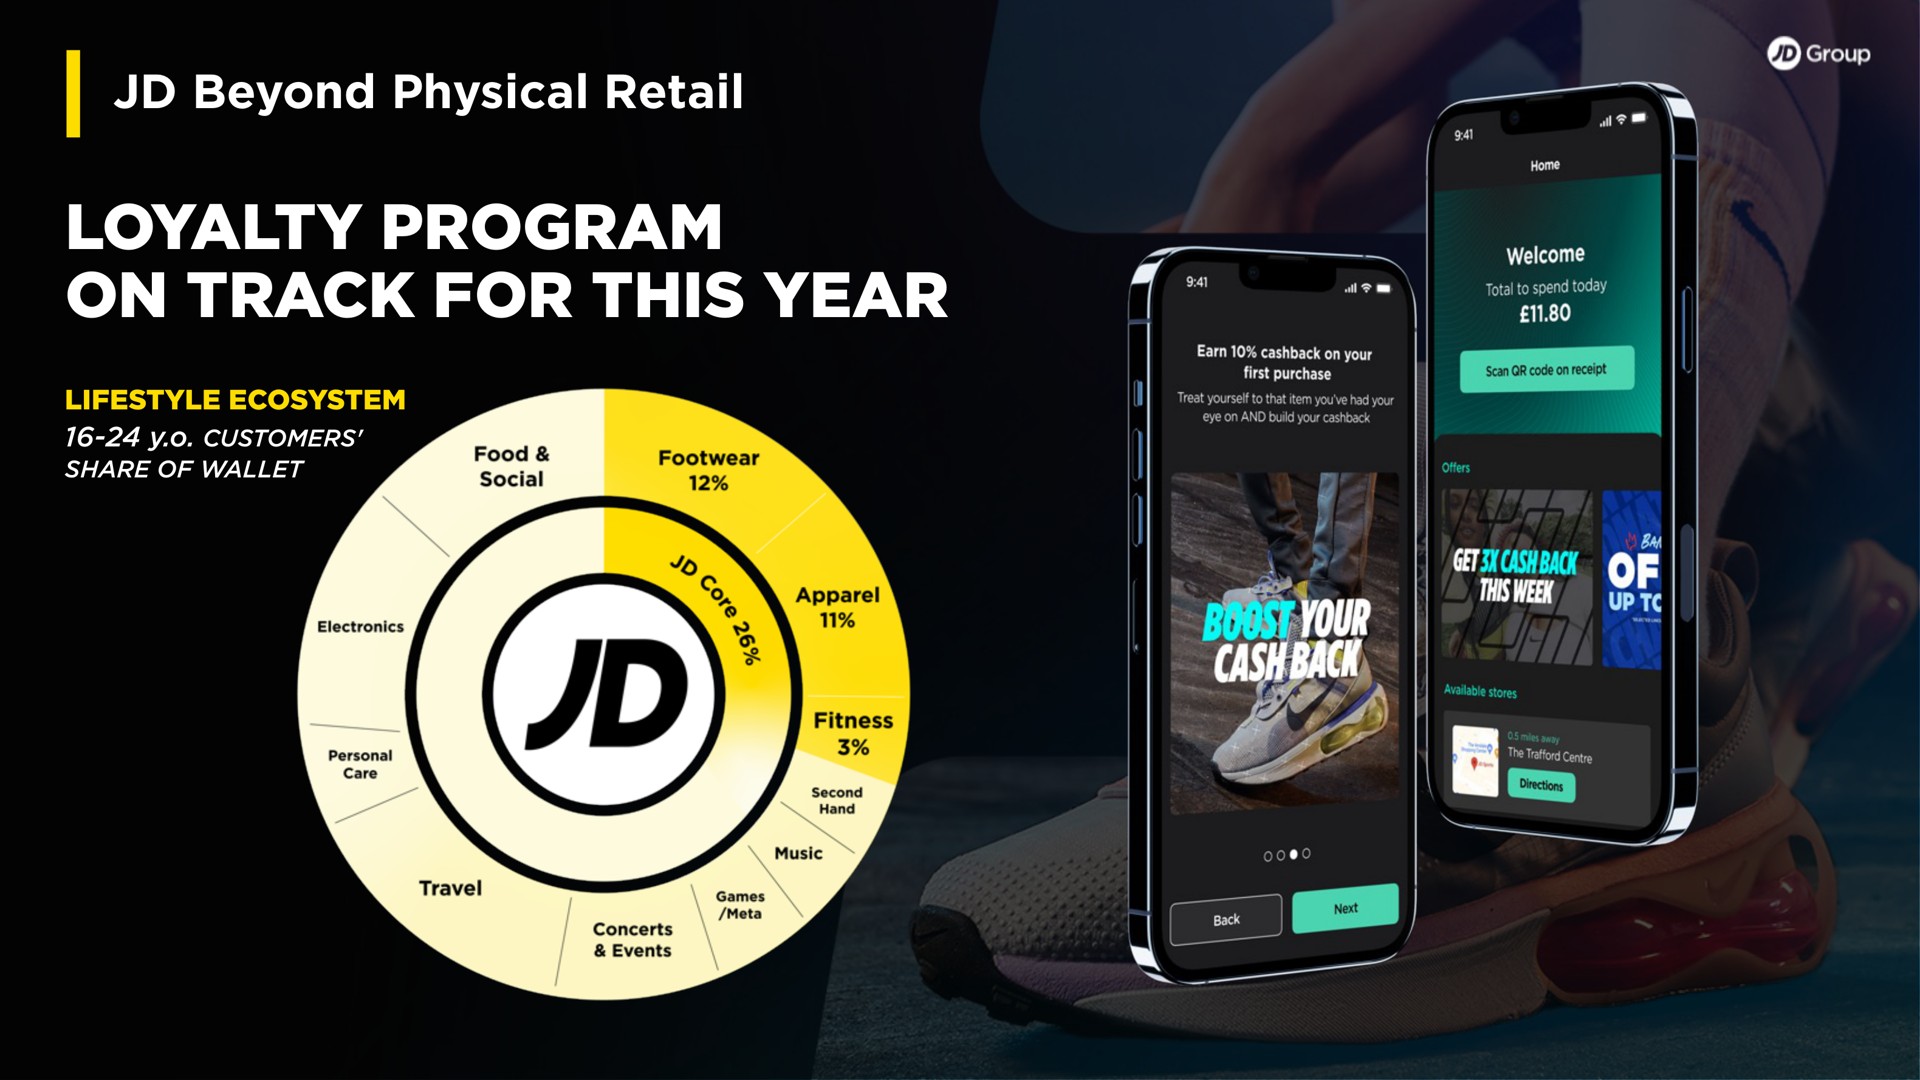 beyond physical retail loyalty program on track for this year | JD Sports